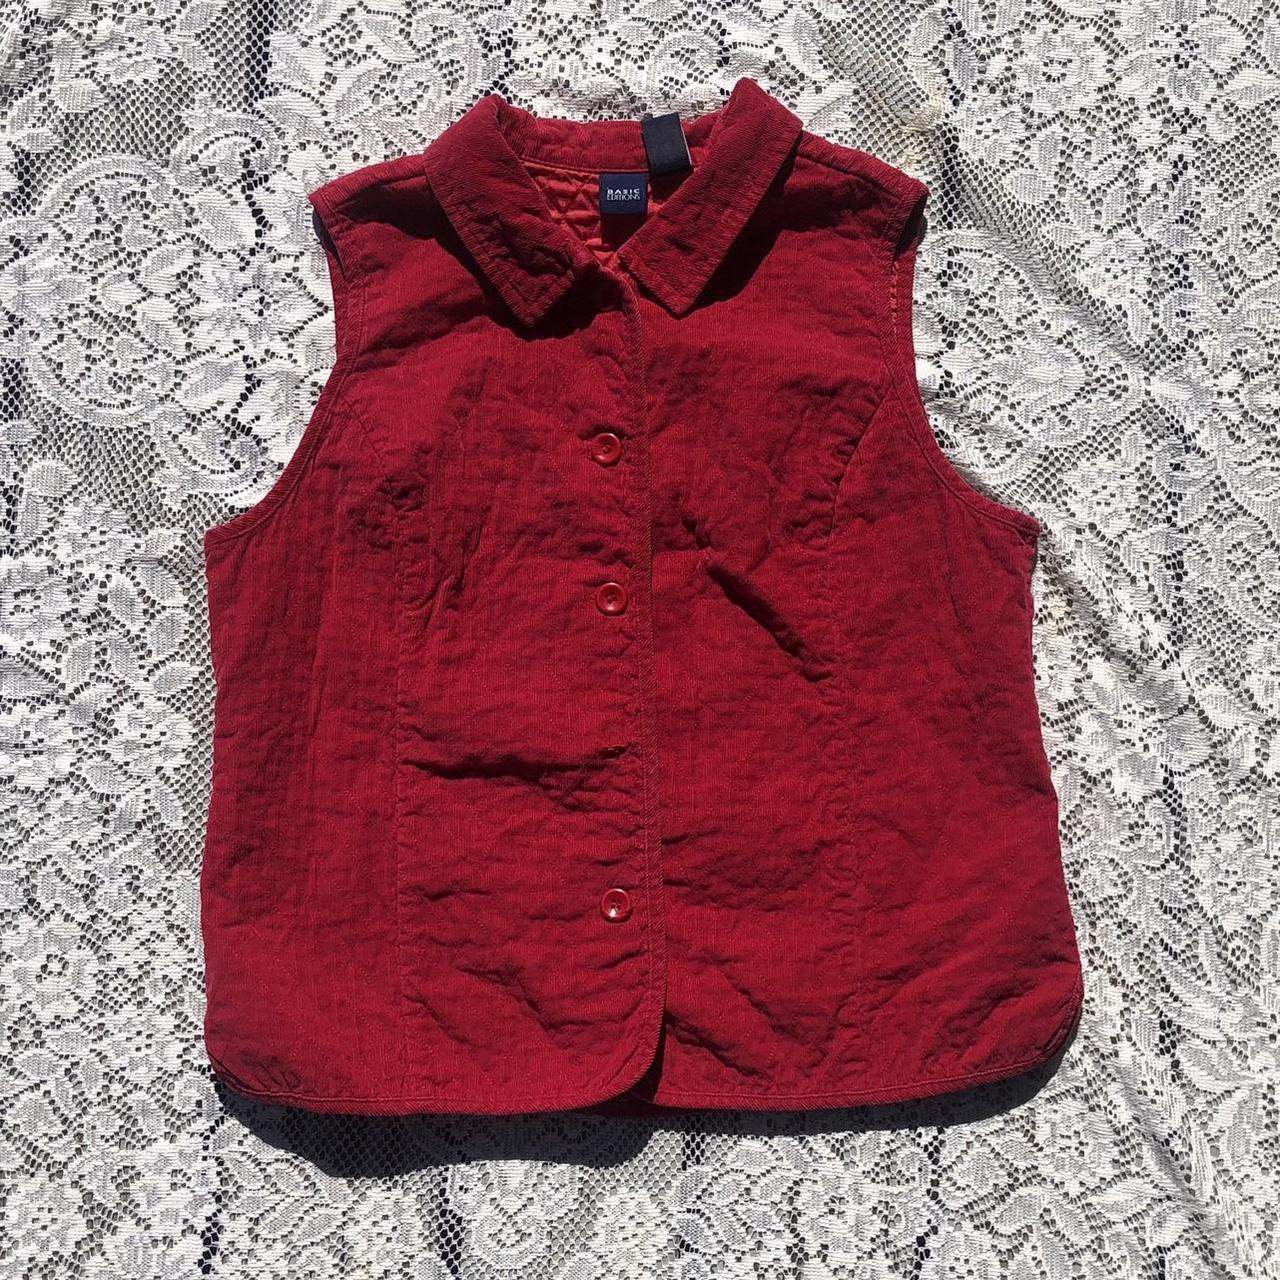 Basic Editions Women's Red Gilet